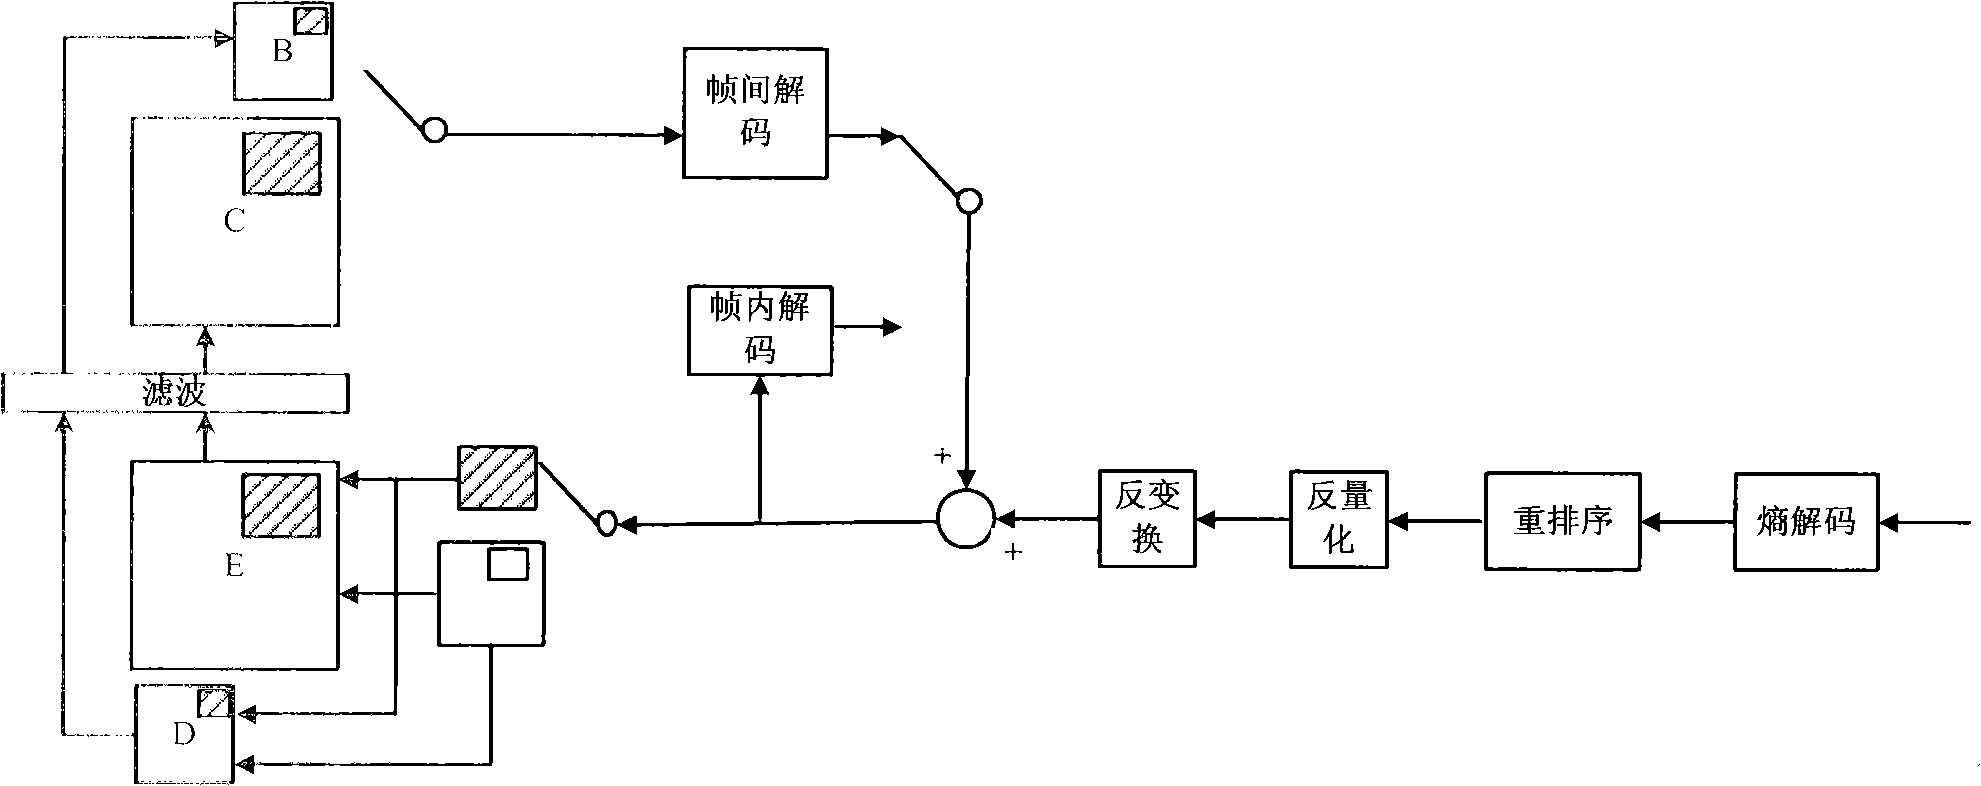 Method for encoding and decoding airspace with adjustable resolution based on interesting area